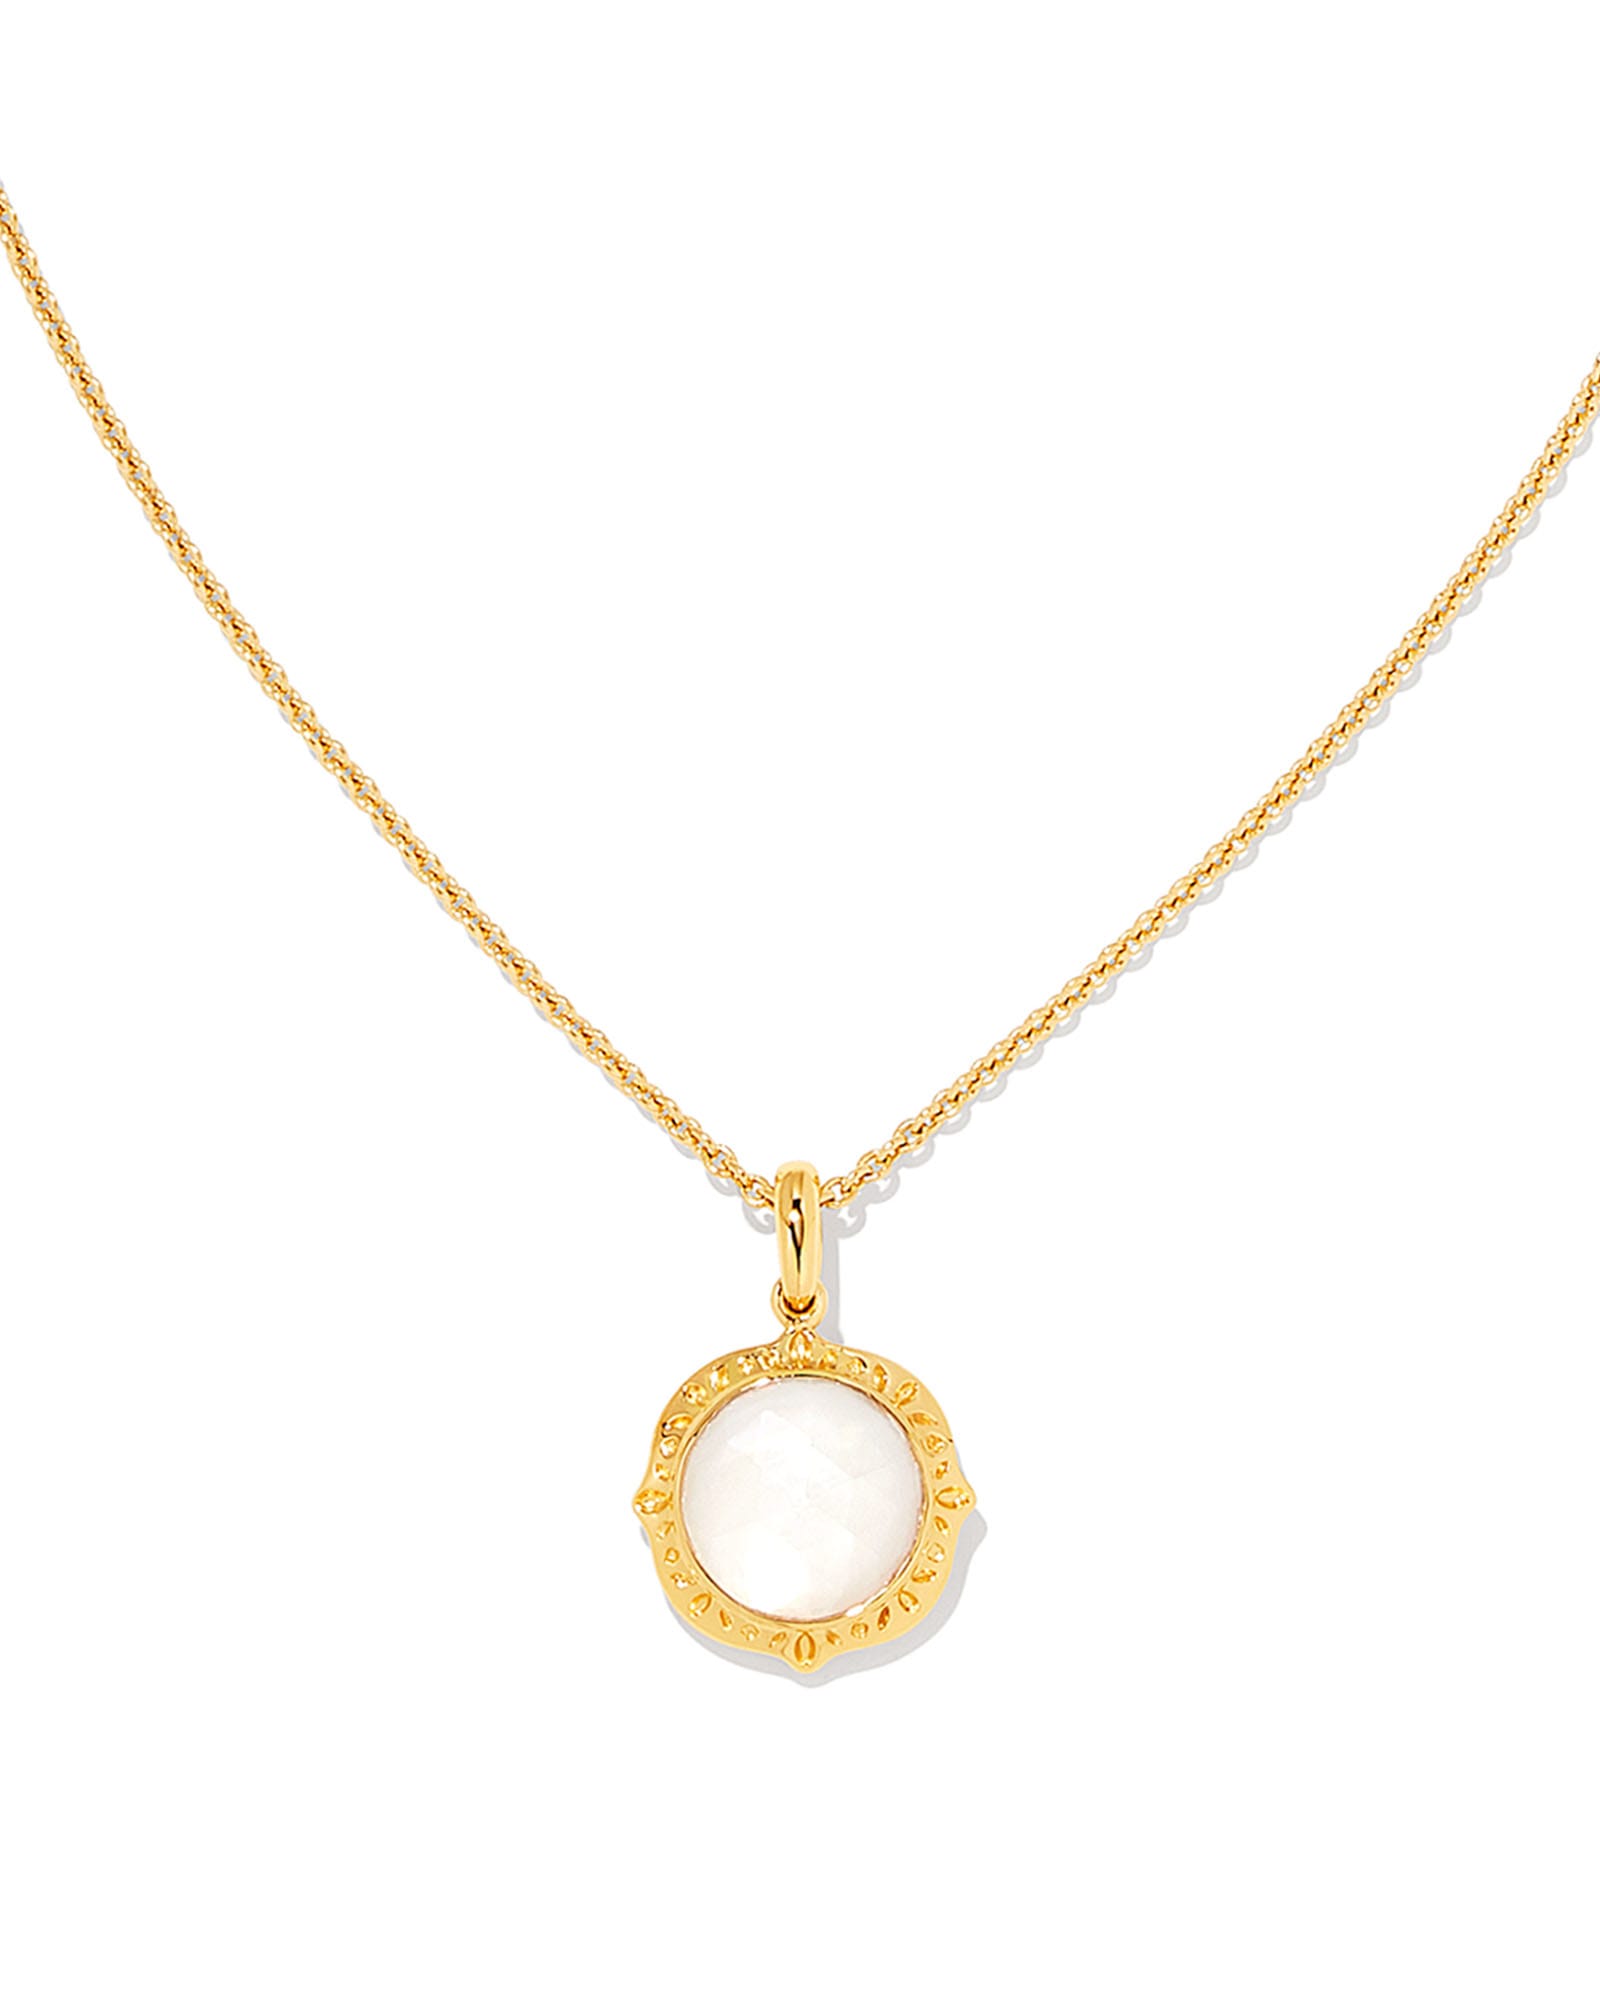 Kendra Scott Sage 18k Gold Vermeil Pendant Necklace in Ivory Mother-of-Pearl | Mother Of Pearl